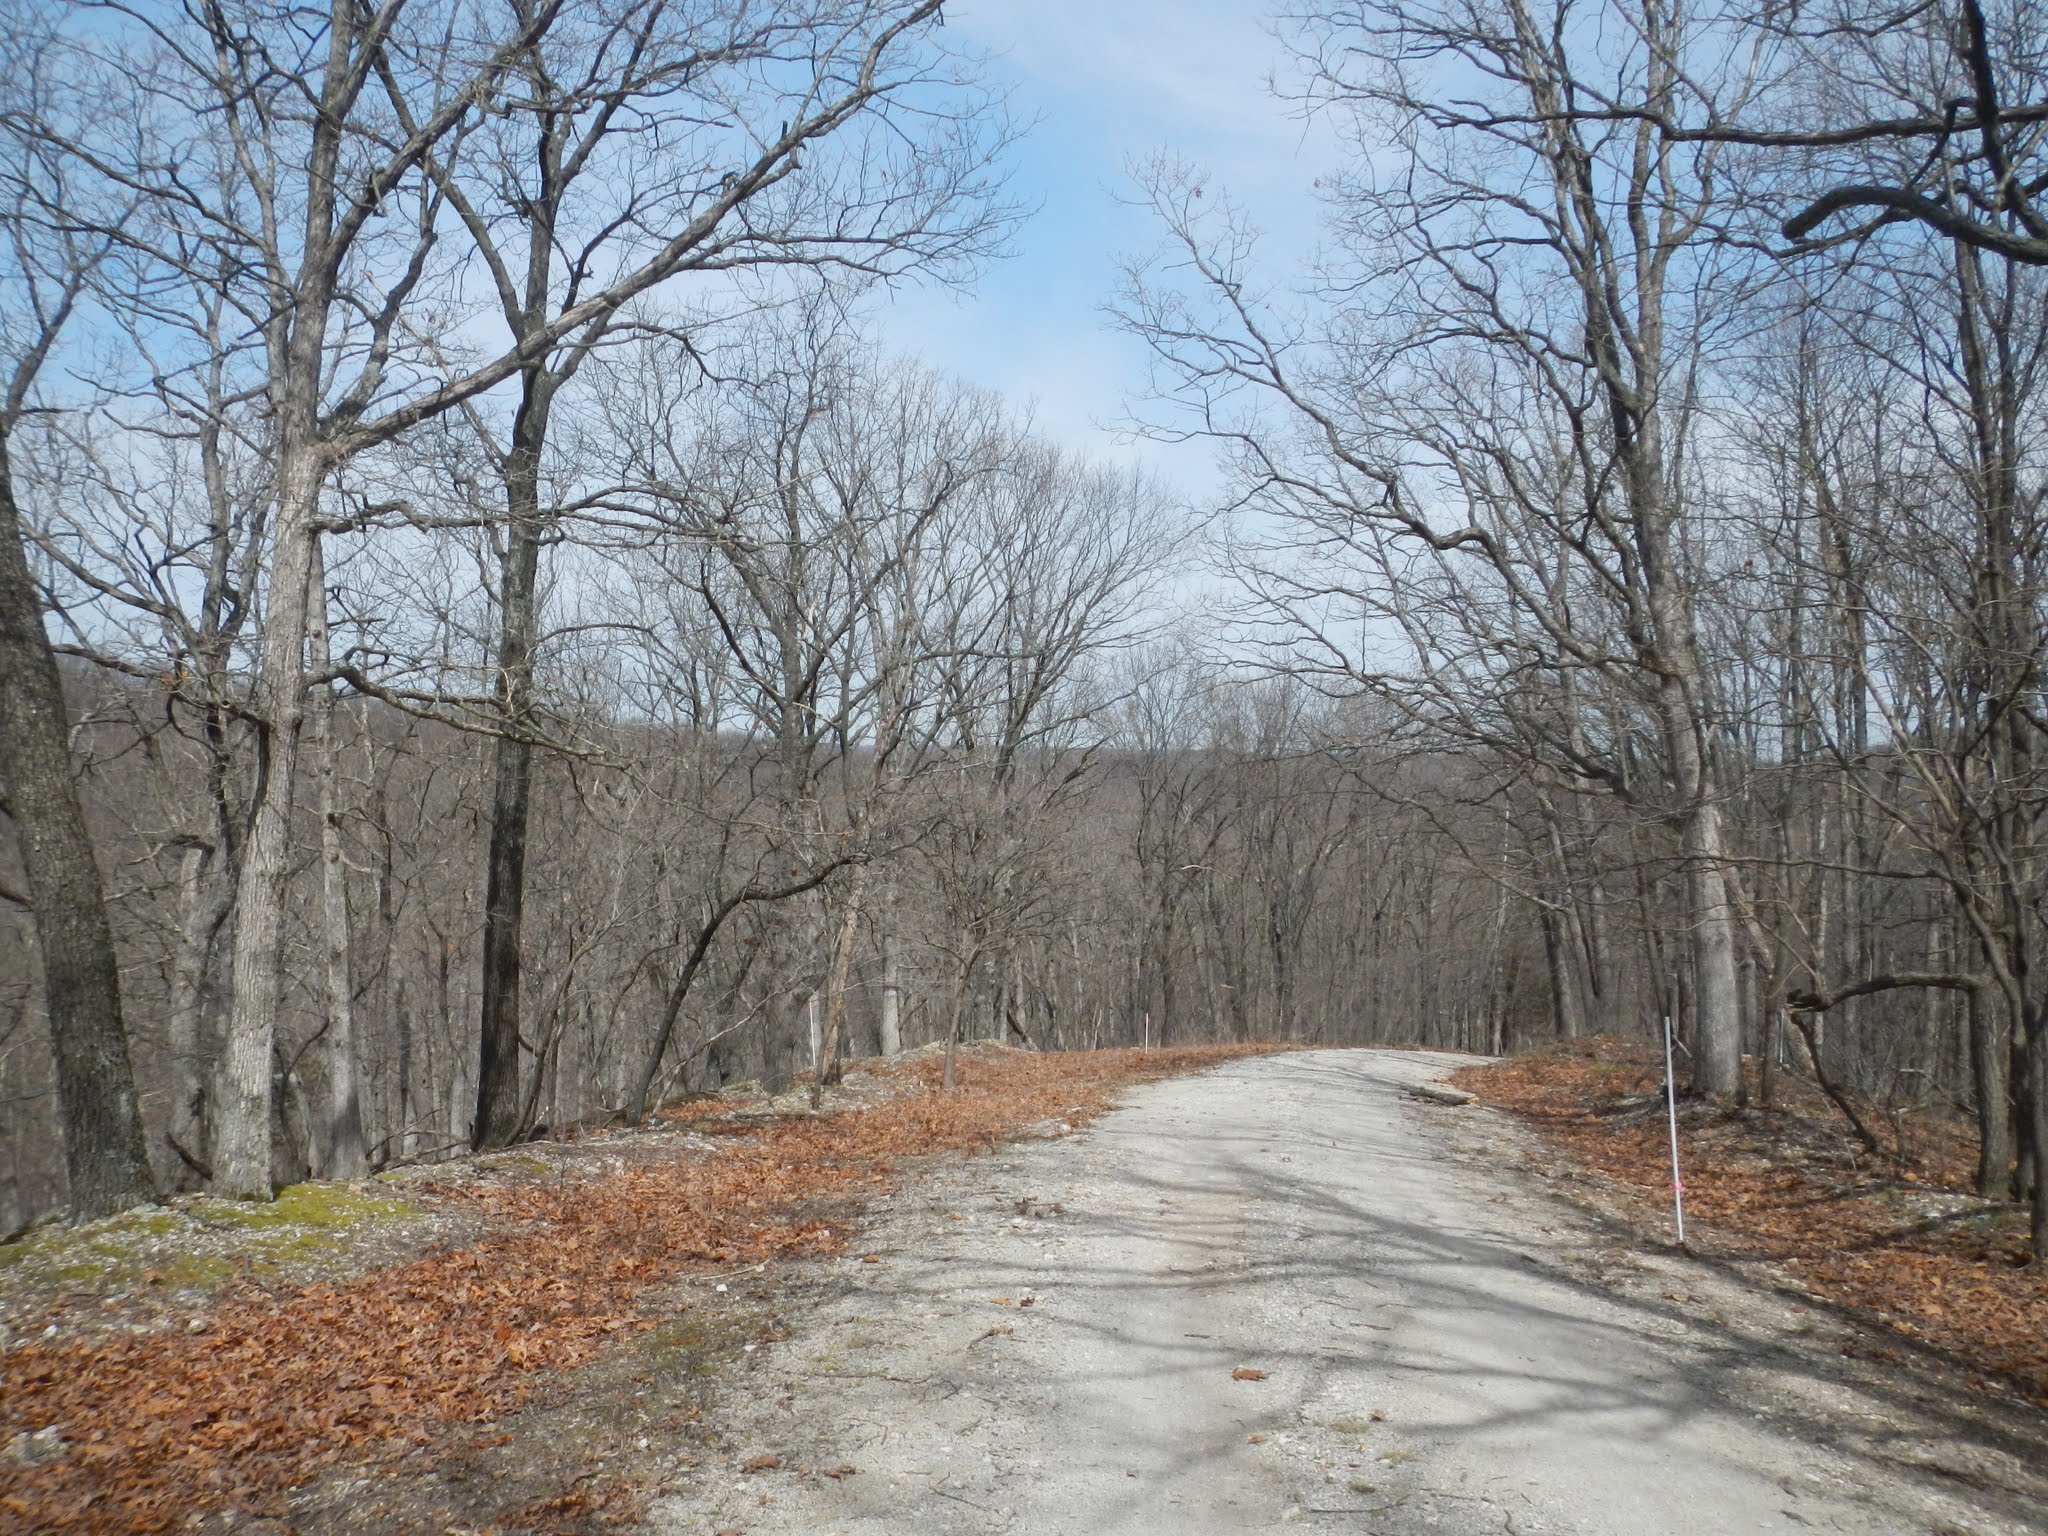 Photo of a road through forest without leaves on trees at Tyson Research Center